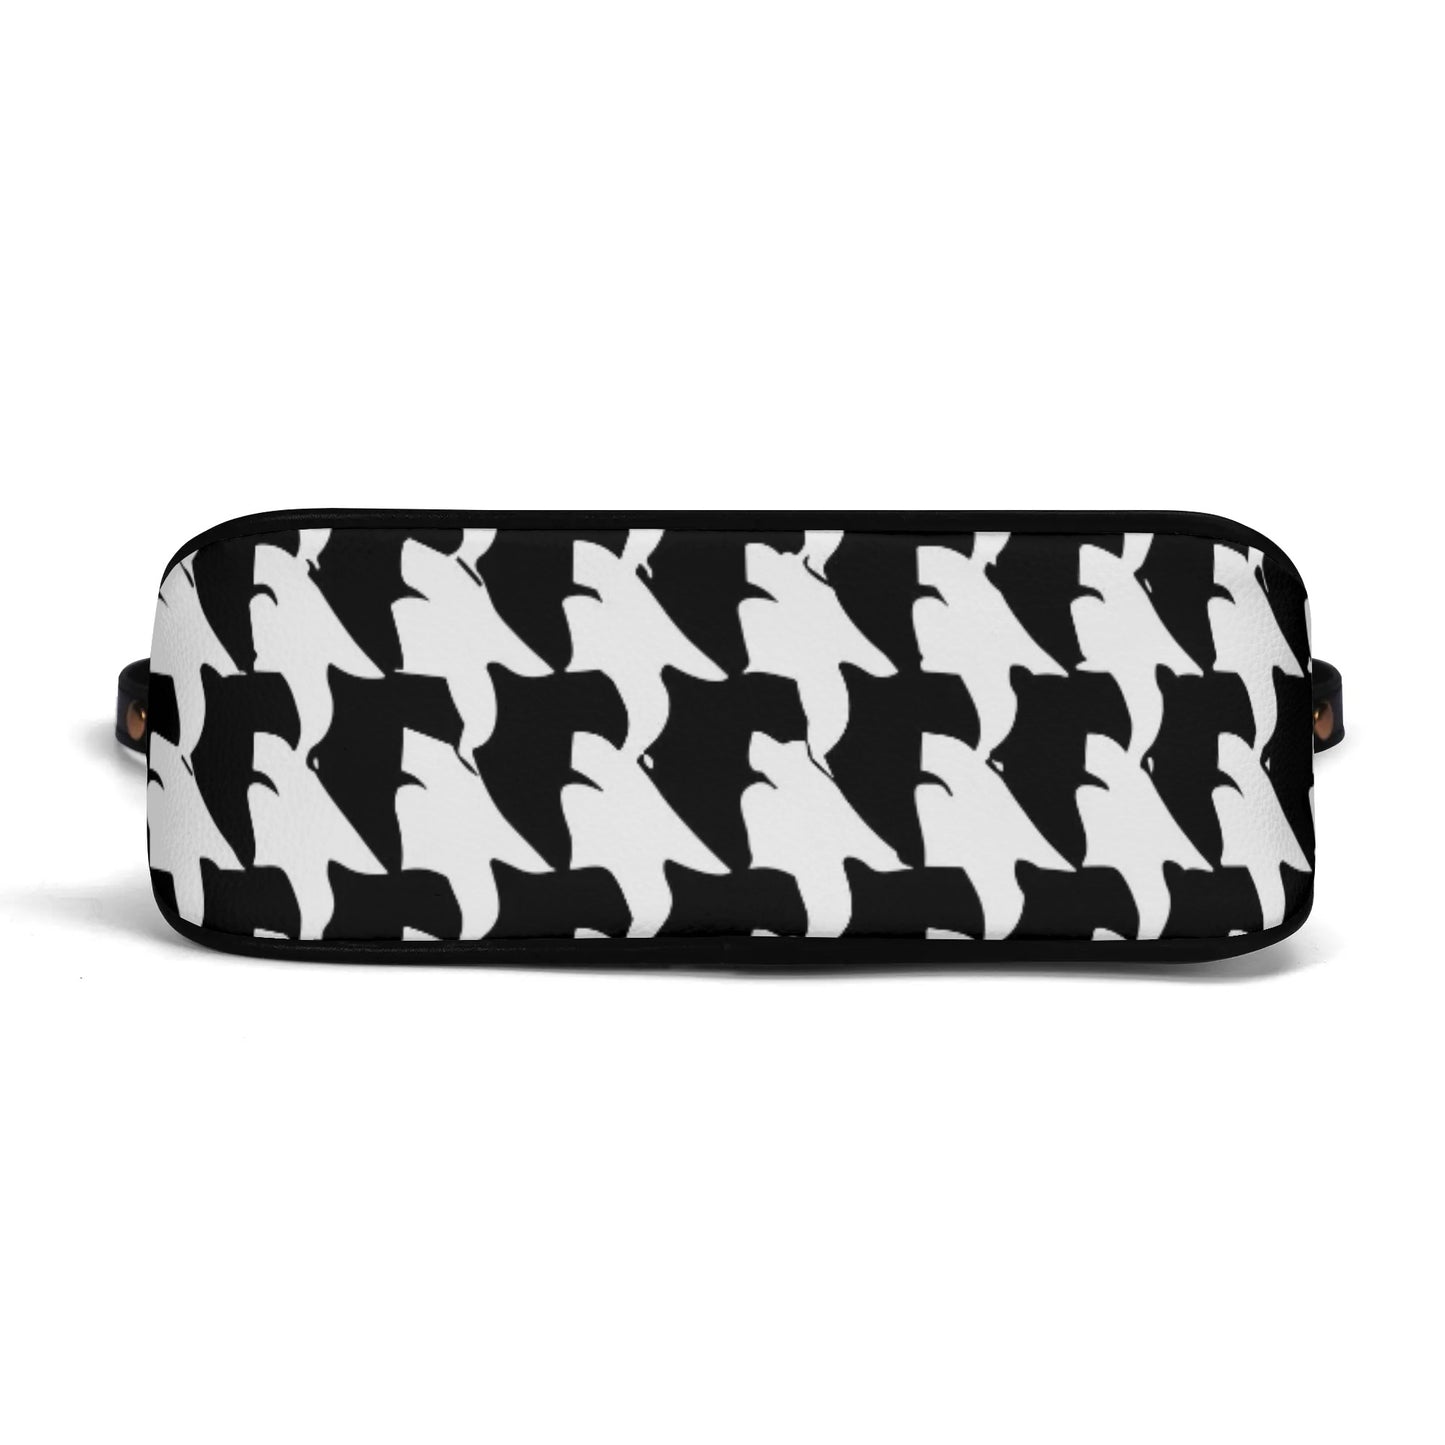 Vampire Art Grunge PU Cross-body Bag With Chain Decoration - Black and White Houndstooth